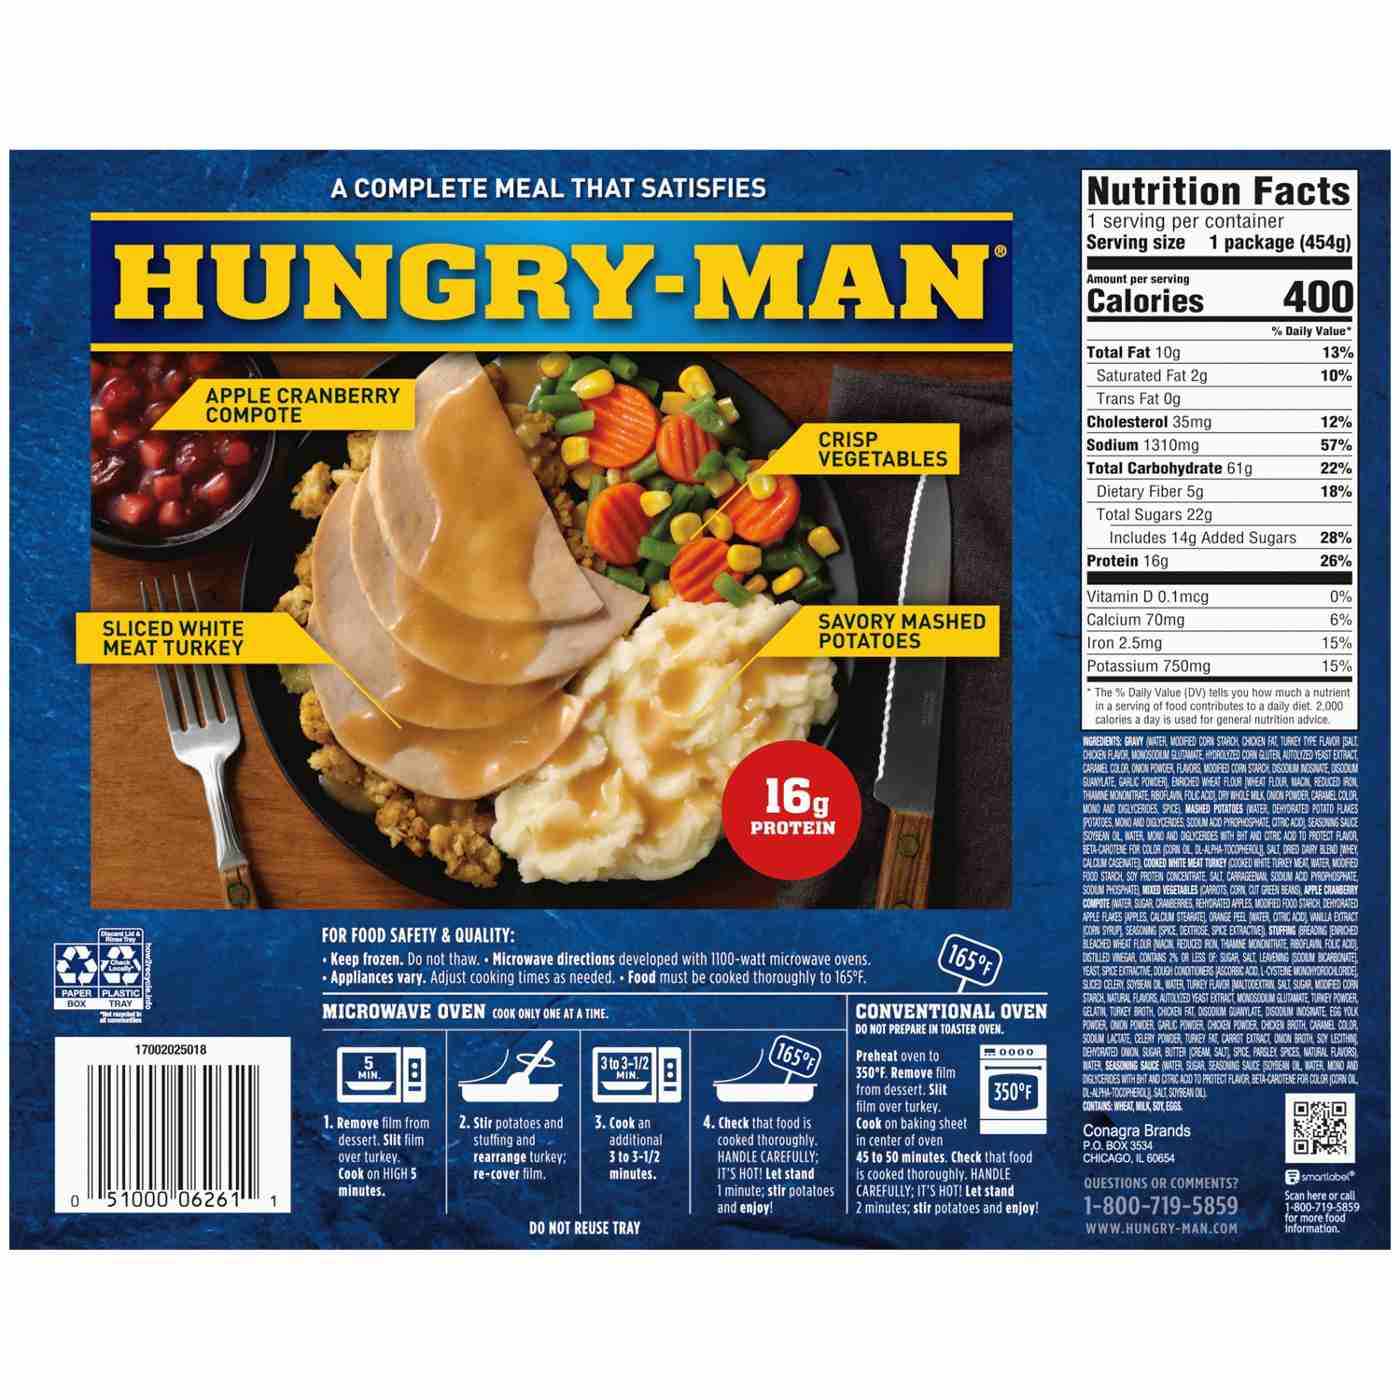 Hungry-Man Roasted Turkey Frozen Meal; image 7 of 7